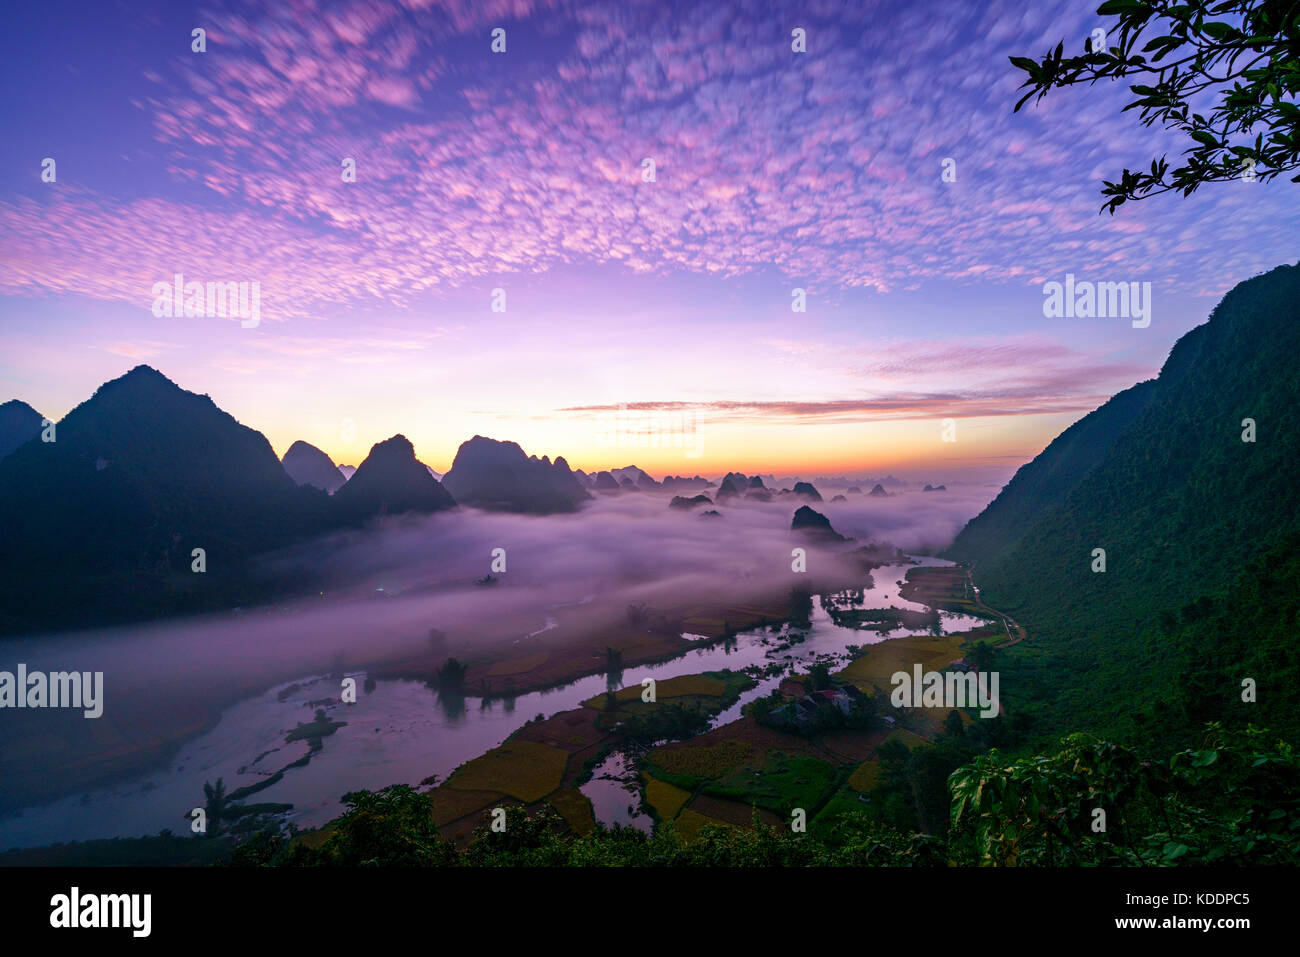 Royalty high quality free stock image of dawn and fog, mountains, river and rice field at Trung Khanh town, Cao Bang province, Vietnam. Stock Photo